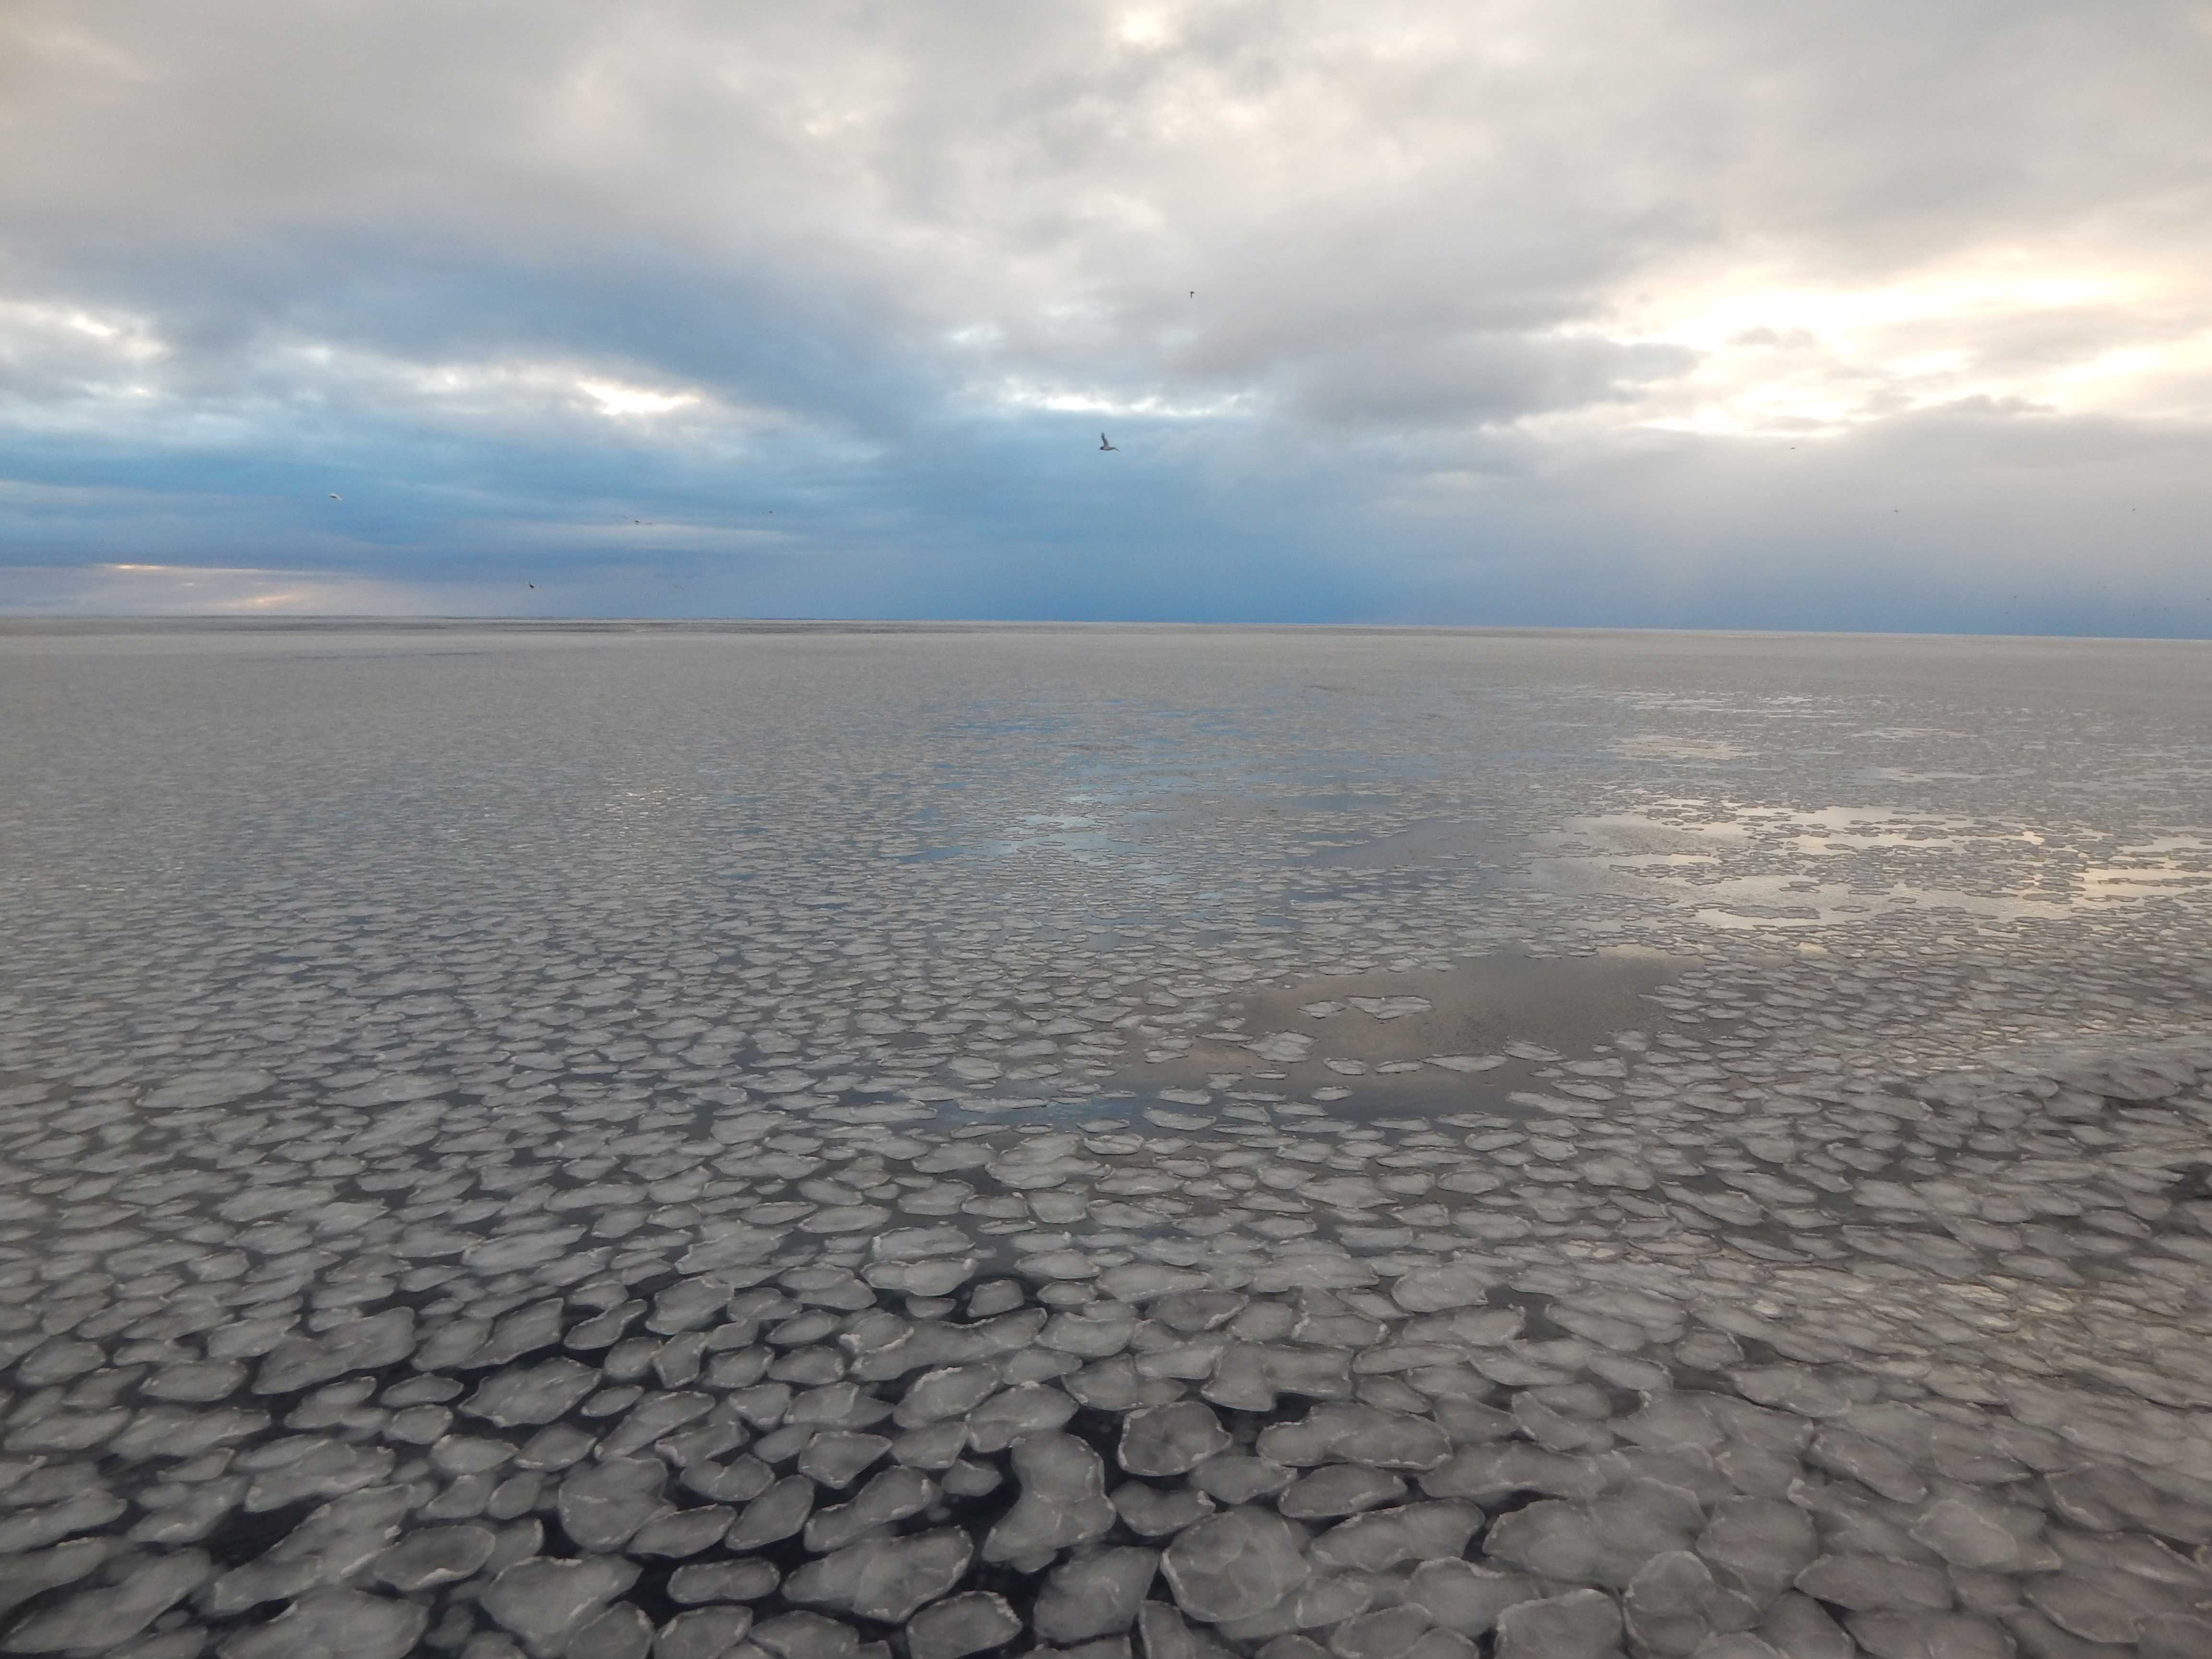 Pancake ice in the ocean as far as the eye can see.